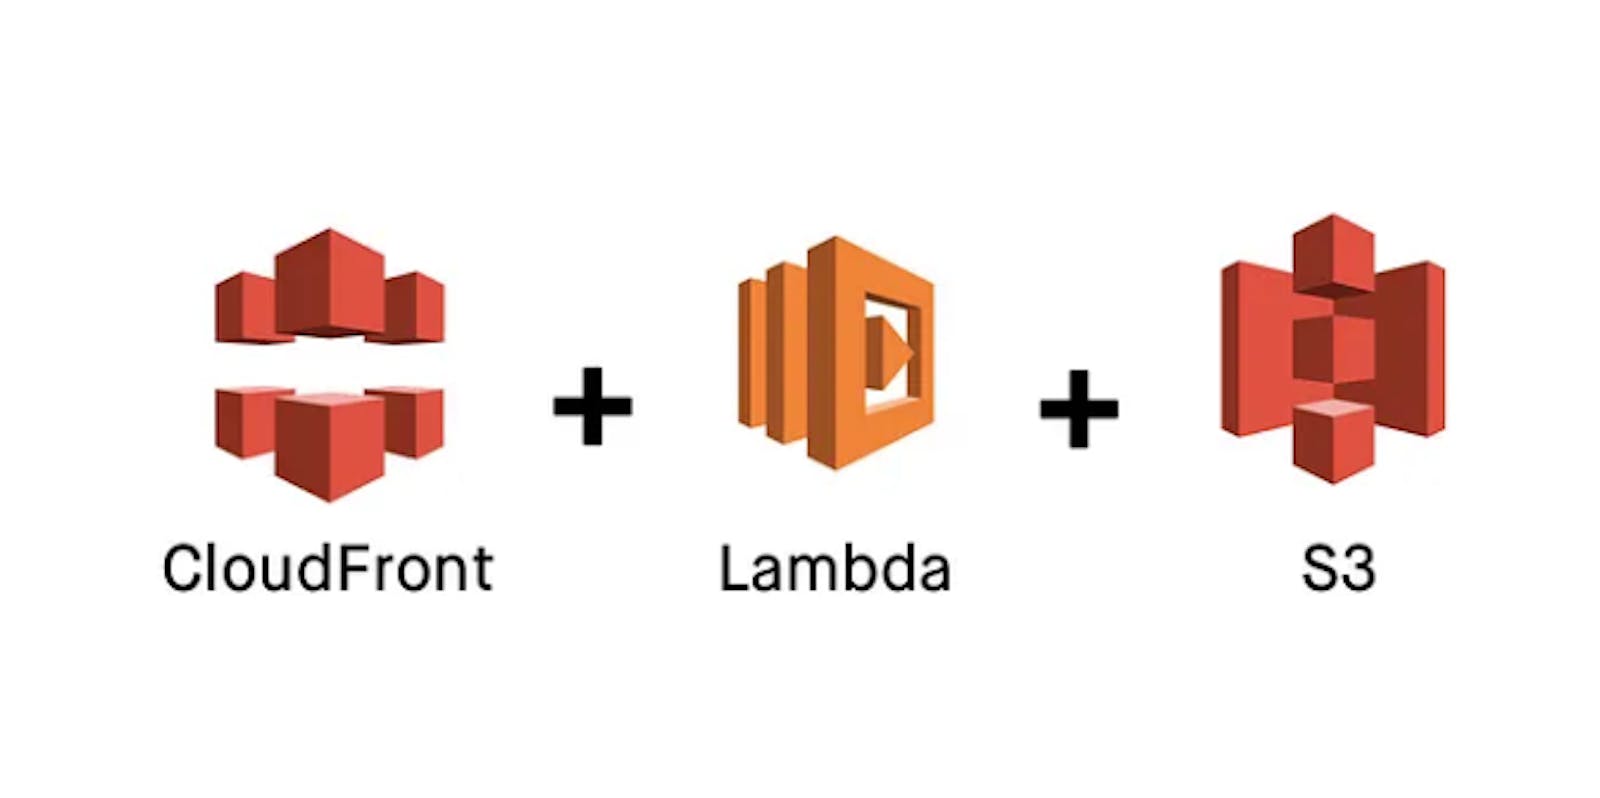 Build a password-protected website using AWS, Cloudfront, Lambda and S3